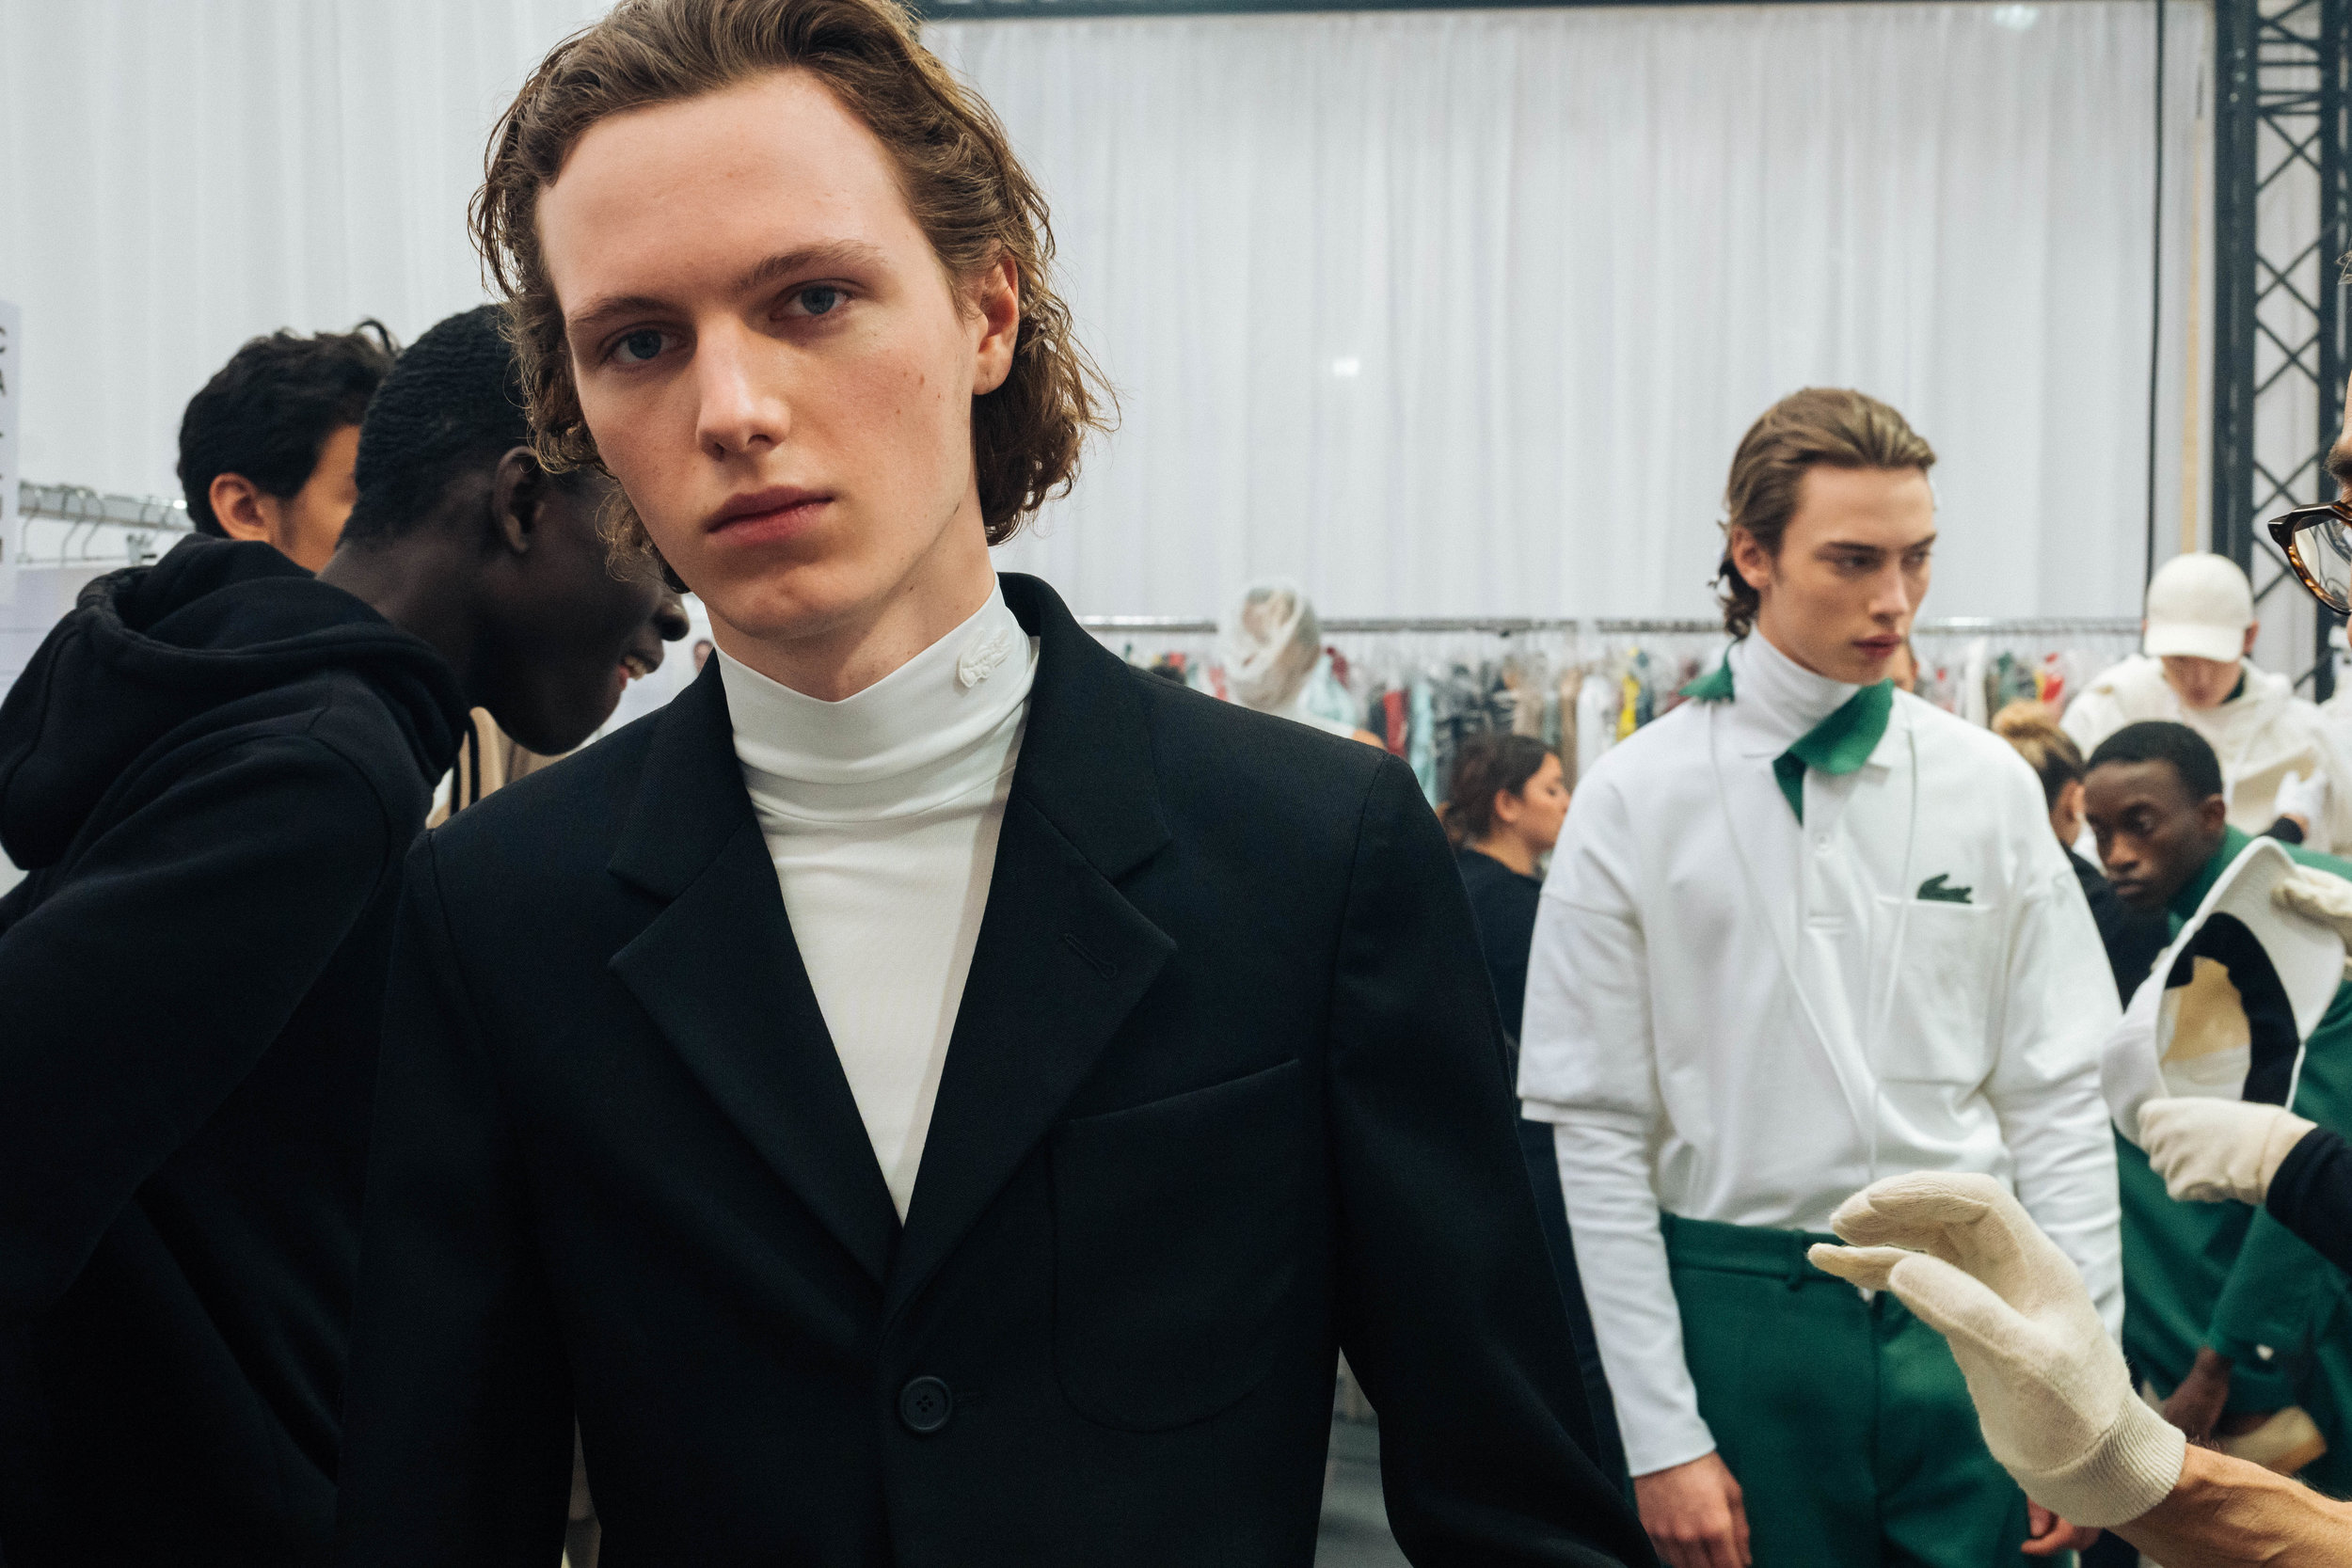  Backstage at the LACOSTE Fall/Winter 2019 runway show in Paris, France on Tuesday, March 5th 2018. Photographed by, Alexandre Faraci. 